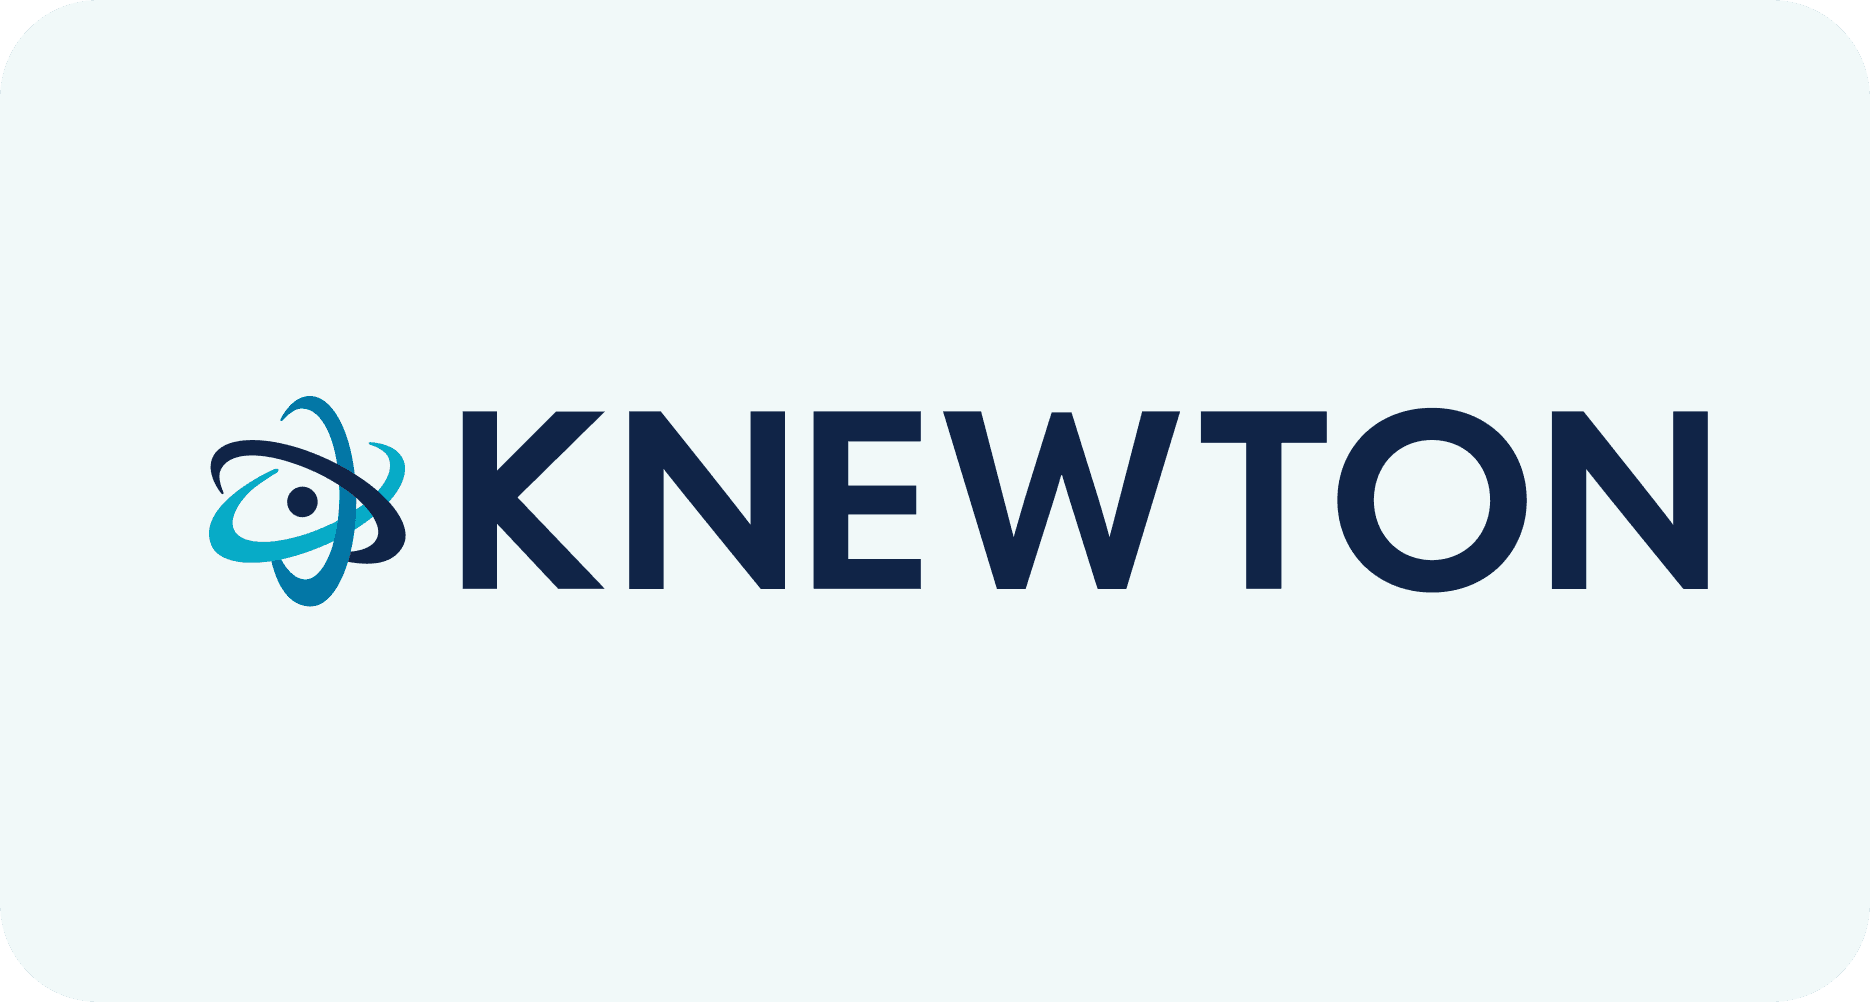 Knewton Logo as an app that features adaptive learning